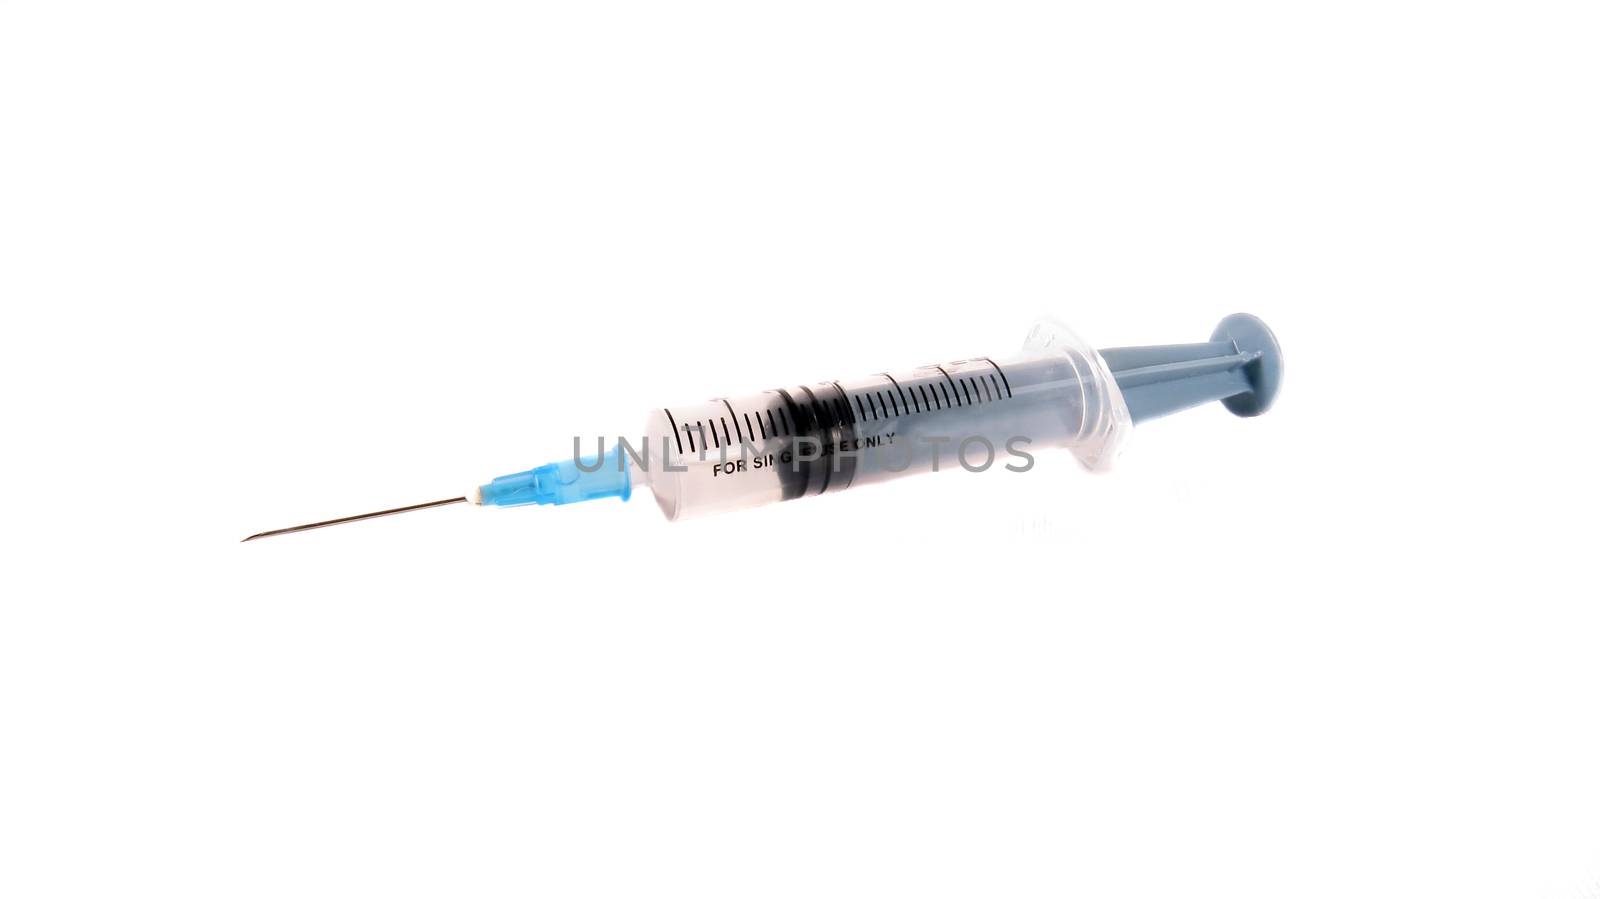 Injection Syringe on White Background by thefinalmiracle